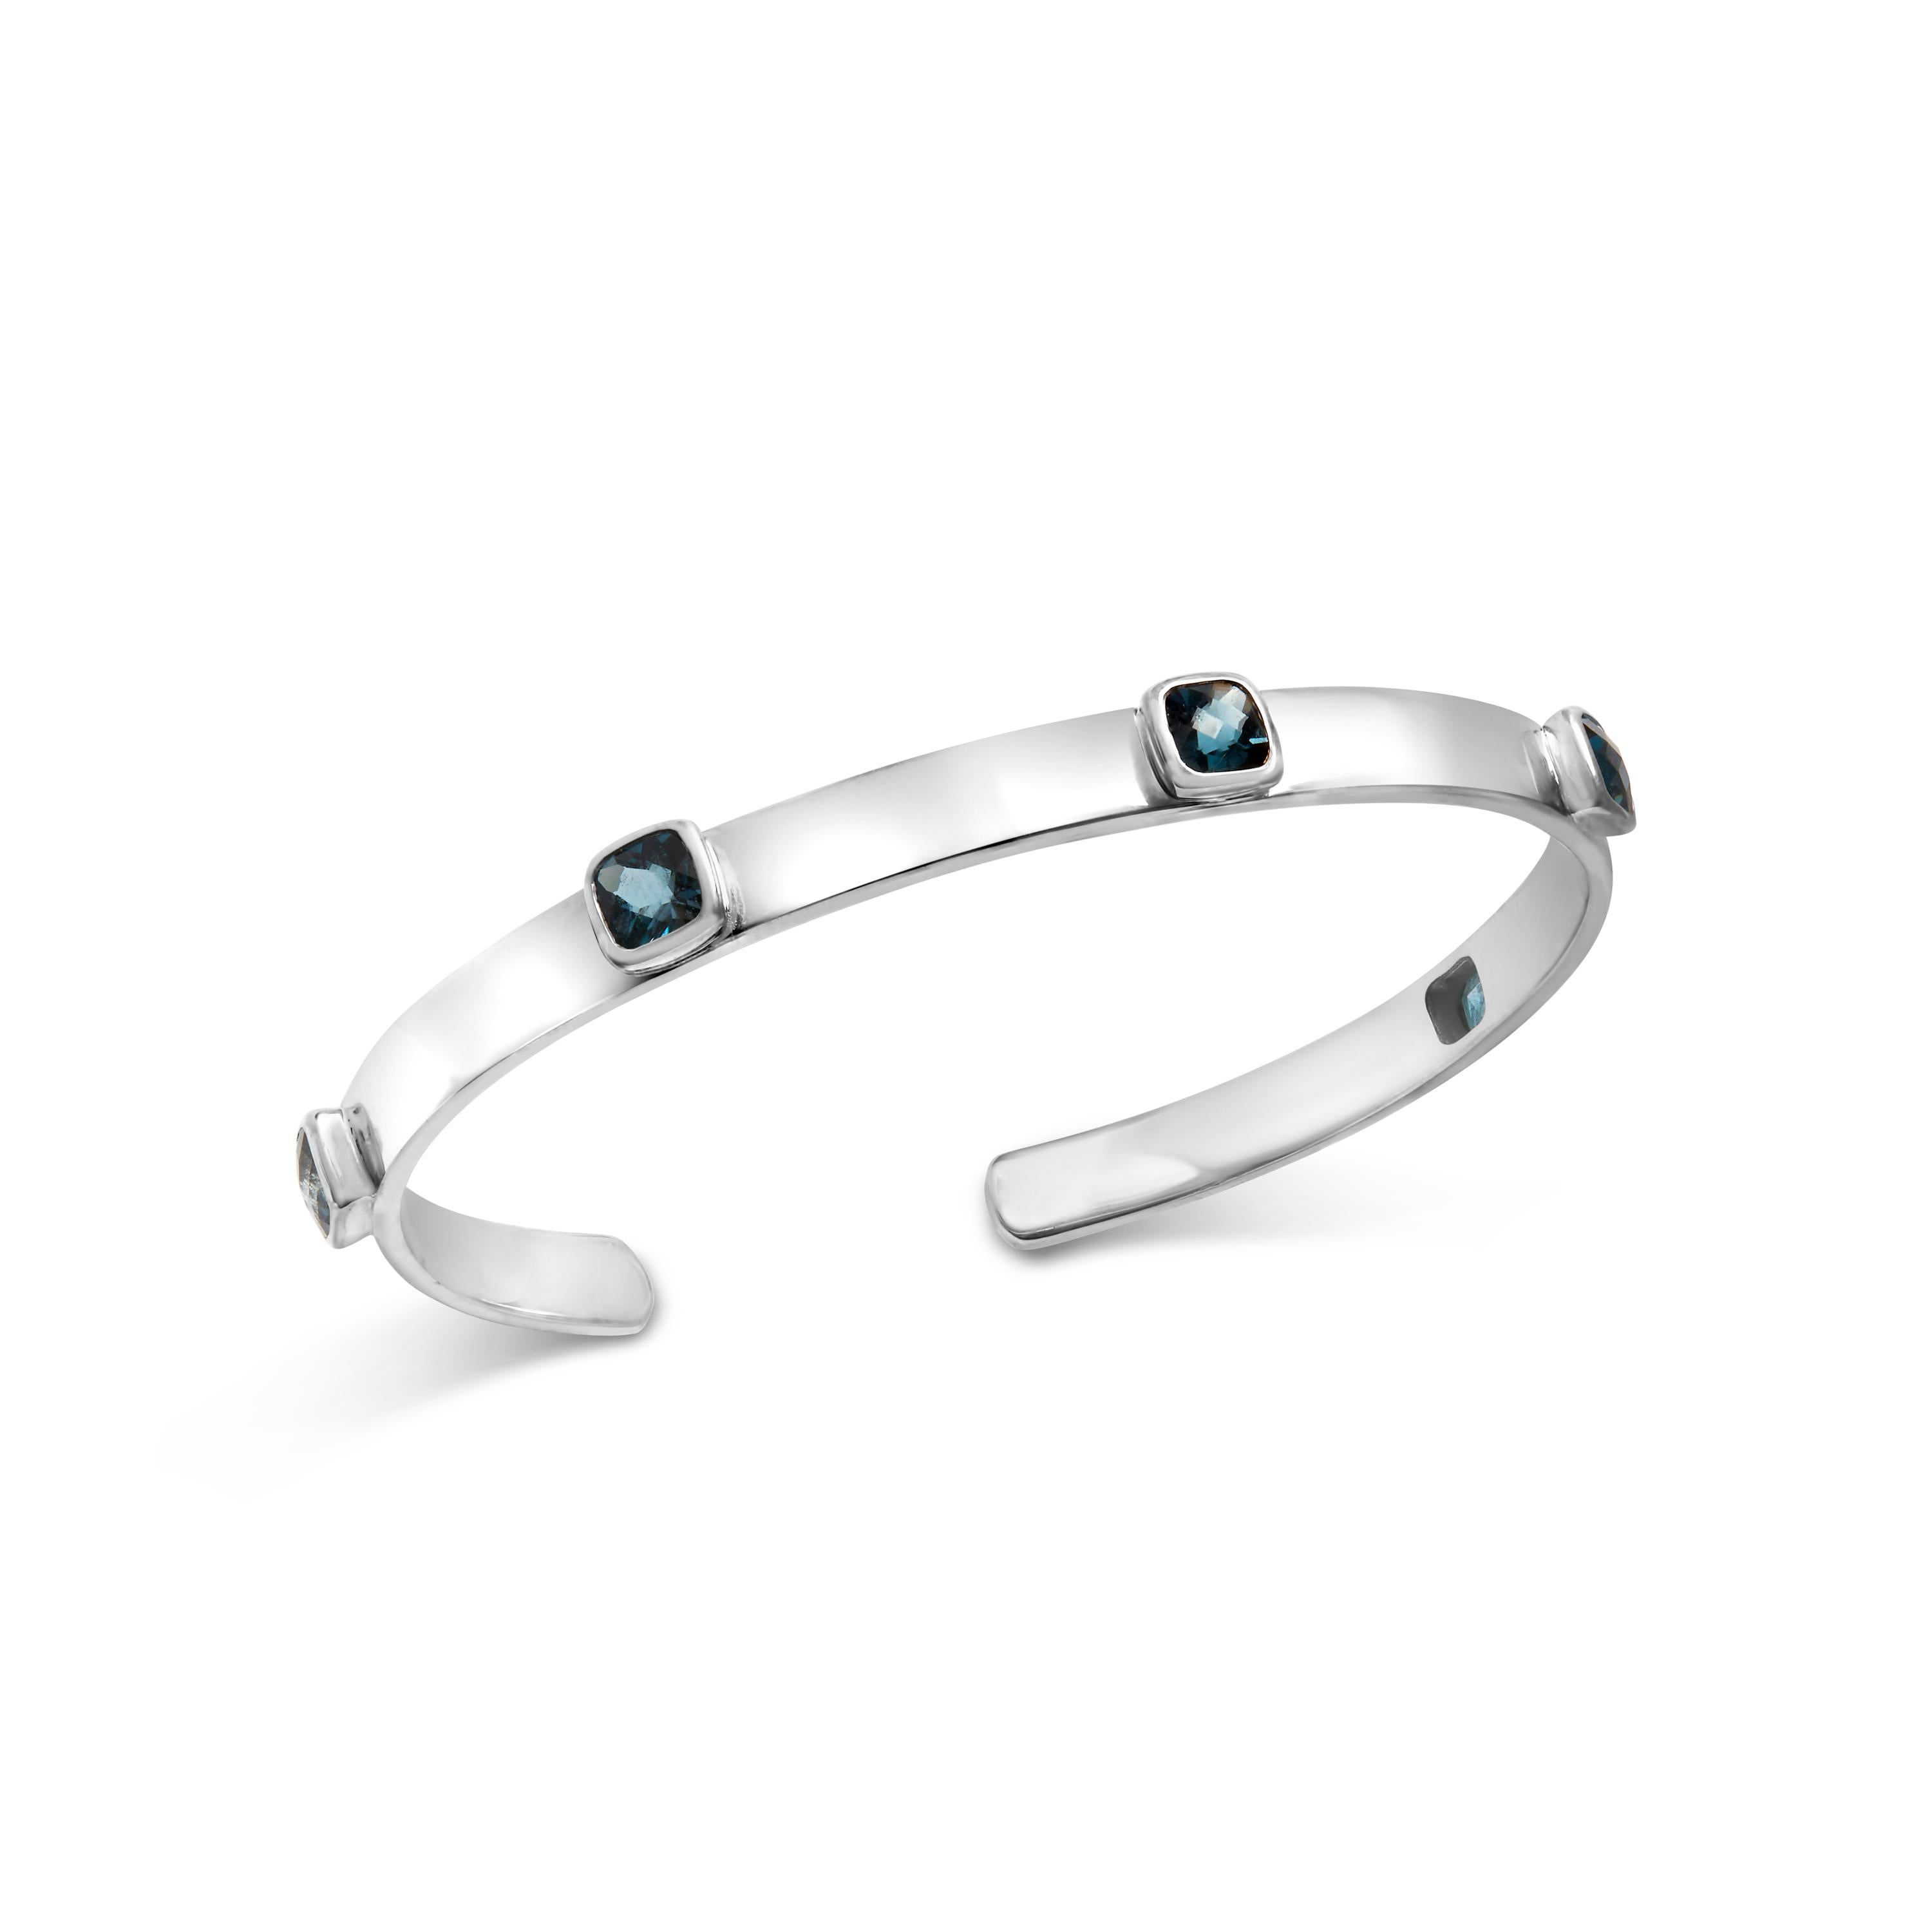 Contemporary .925 Sterling Silver and Bezel Set Checkerboard Cushion Cut Blue Topaz Bangle